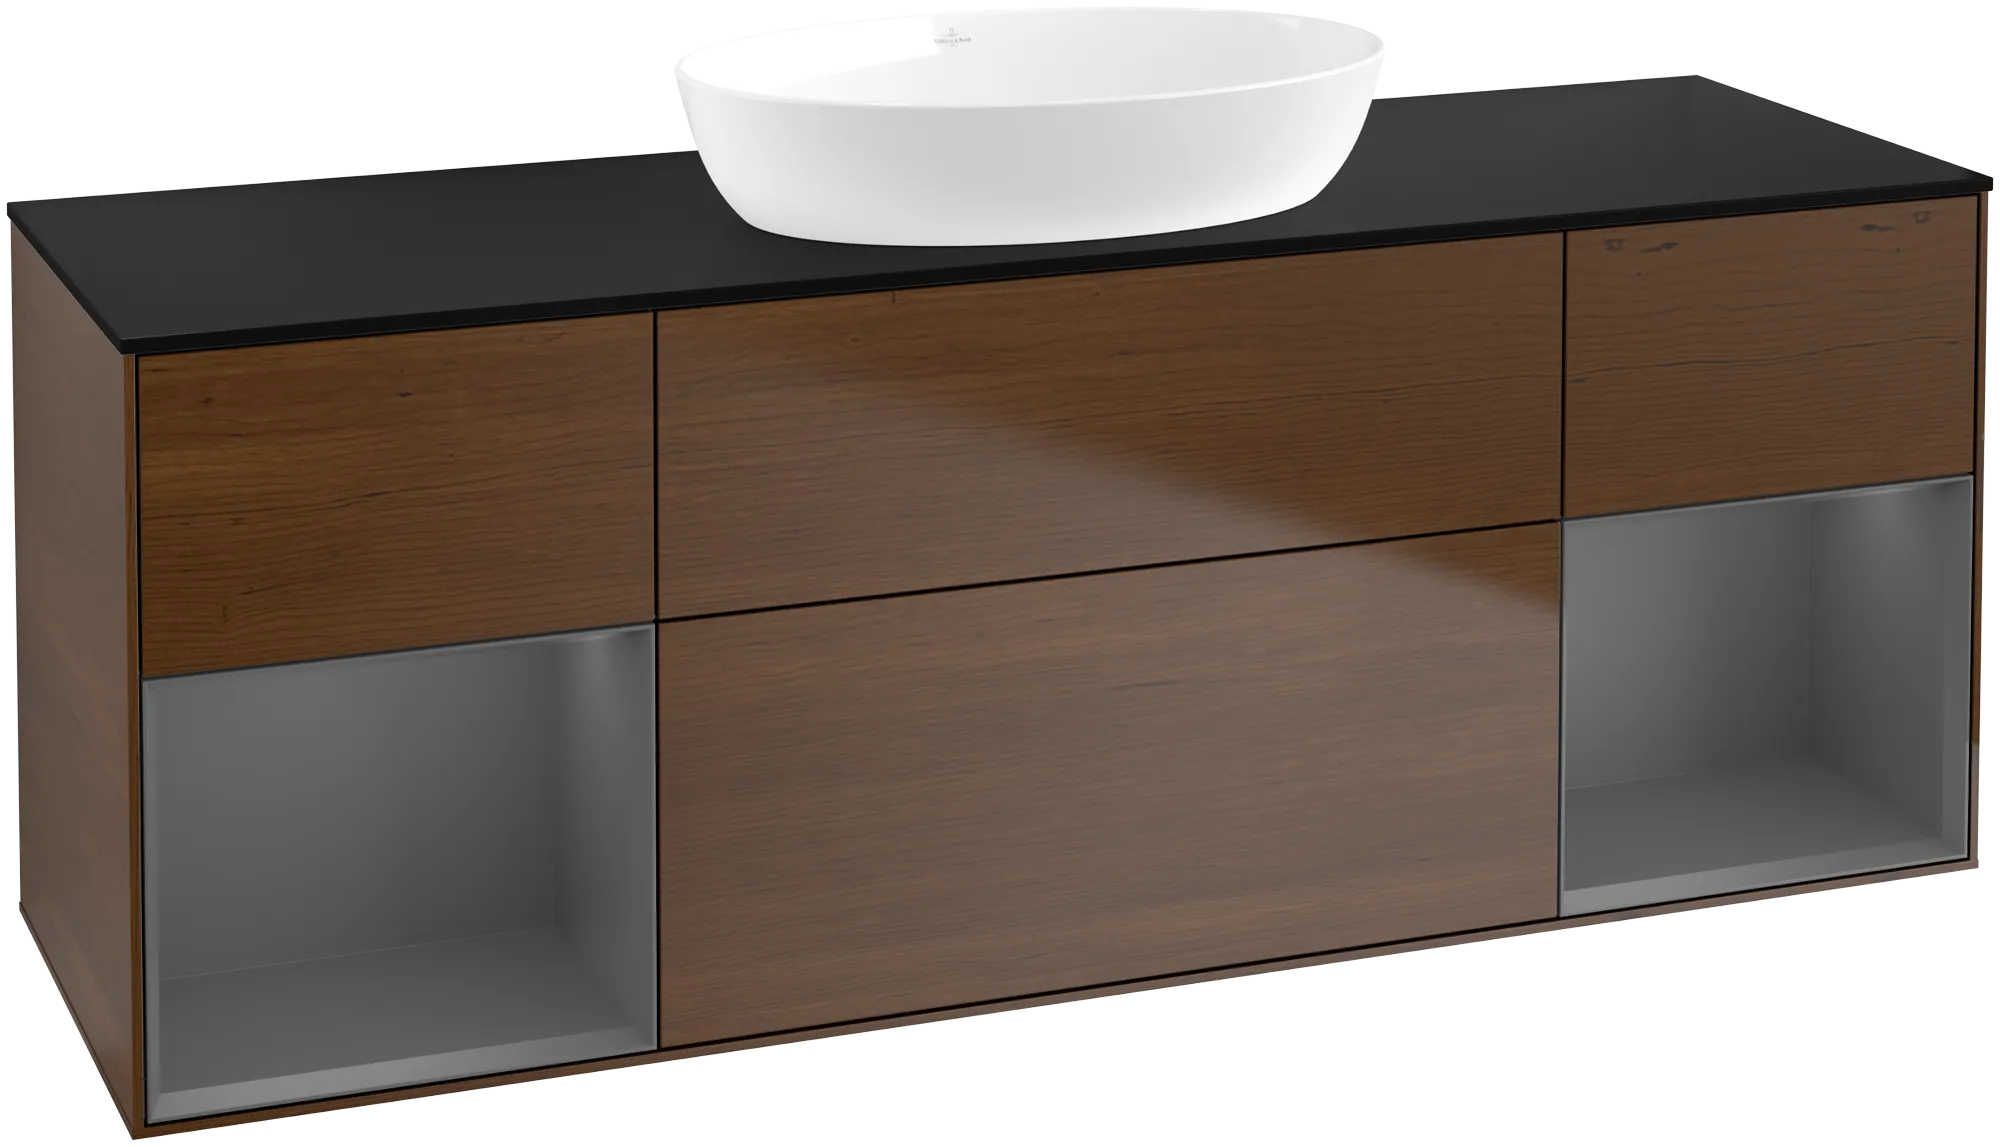 Picture of VILLEROY BOCH Finion Vanity unit, with lighting, 4 pull-out compartments, 1600 x 603 x 501 mm, Walnut Veneer / Anthracite Matt Lacquer / Glass Black Matt #GD02GKGN